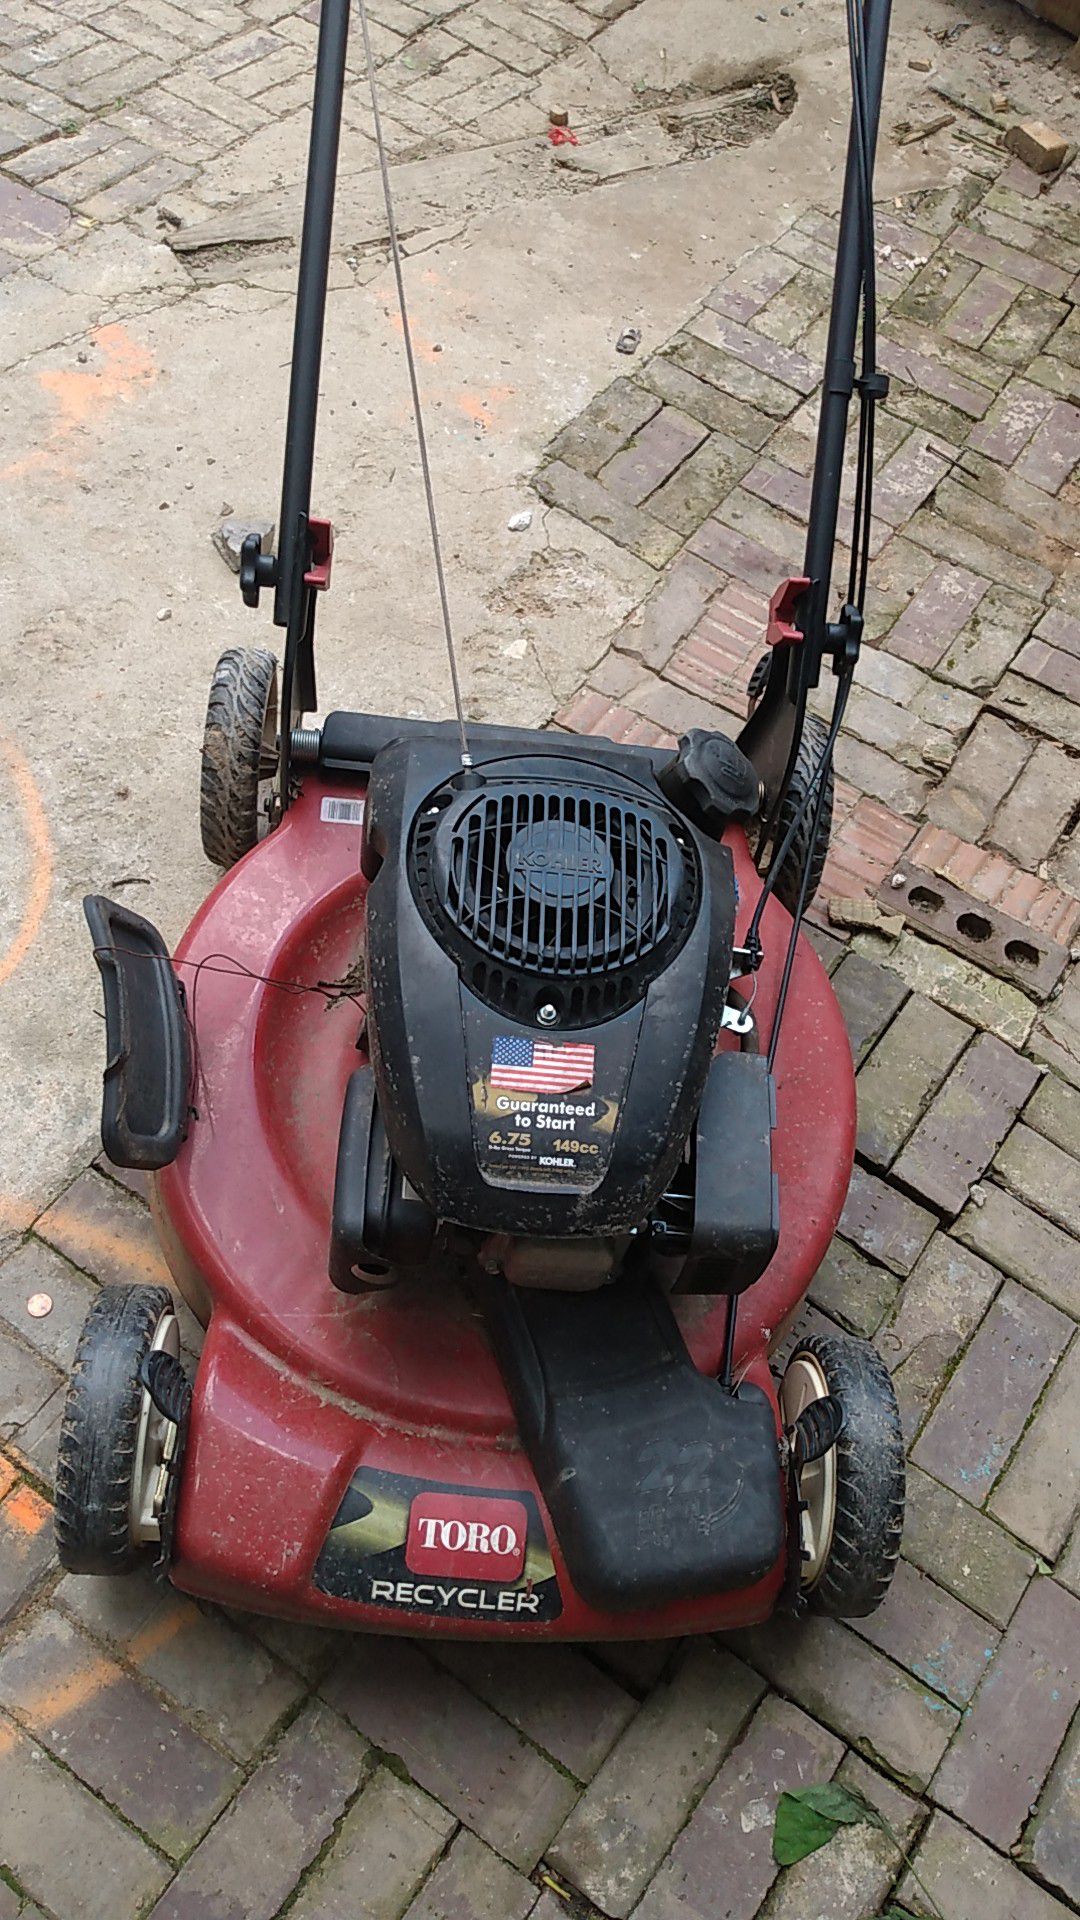 Lawn mover